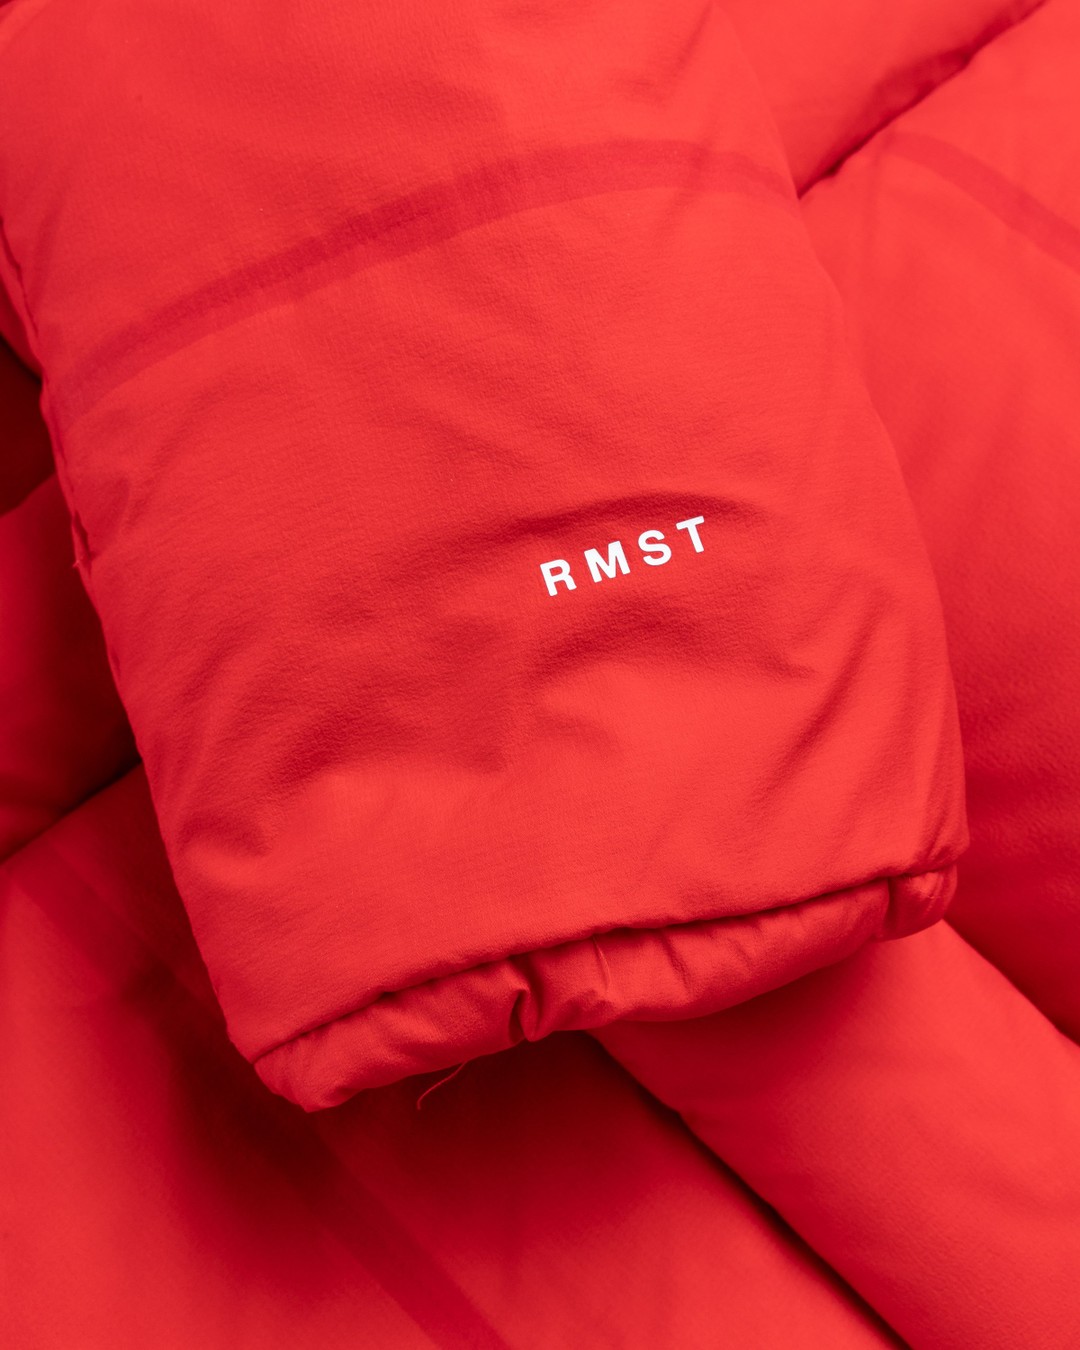 The North Face – RMST Himalayan Parka Red - Outerwear - Red - Image 6